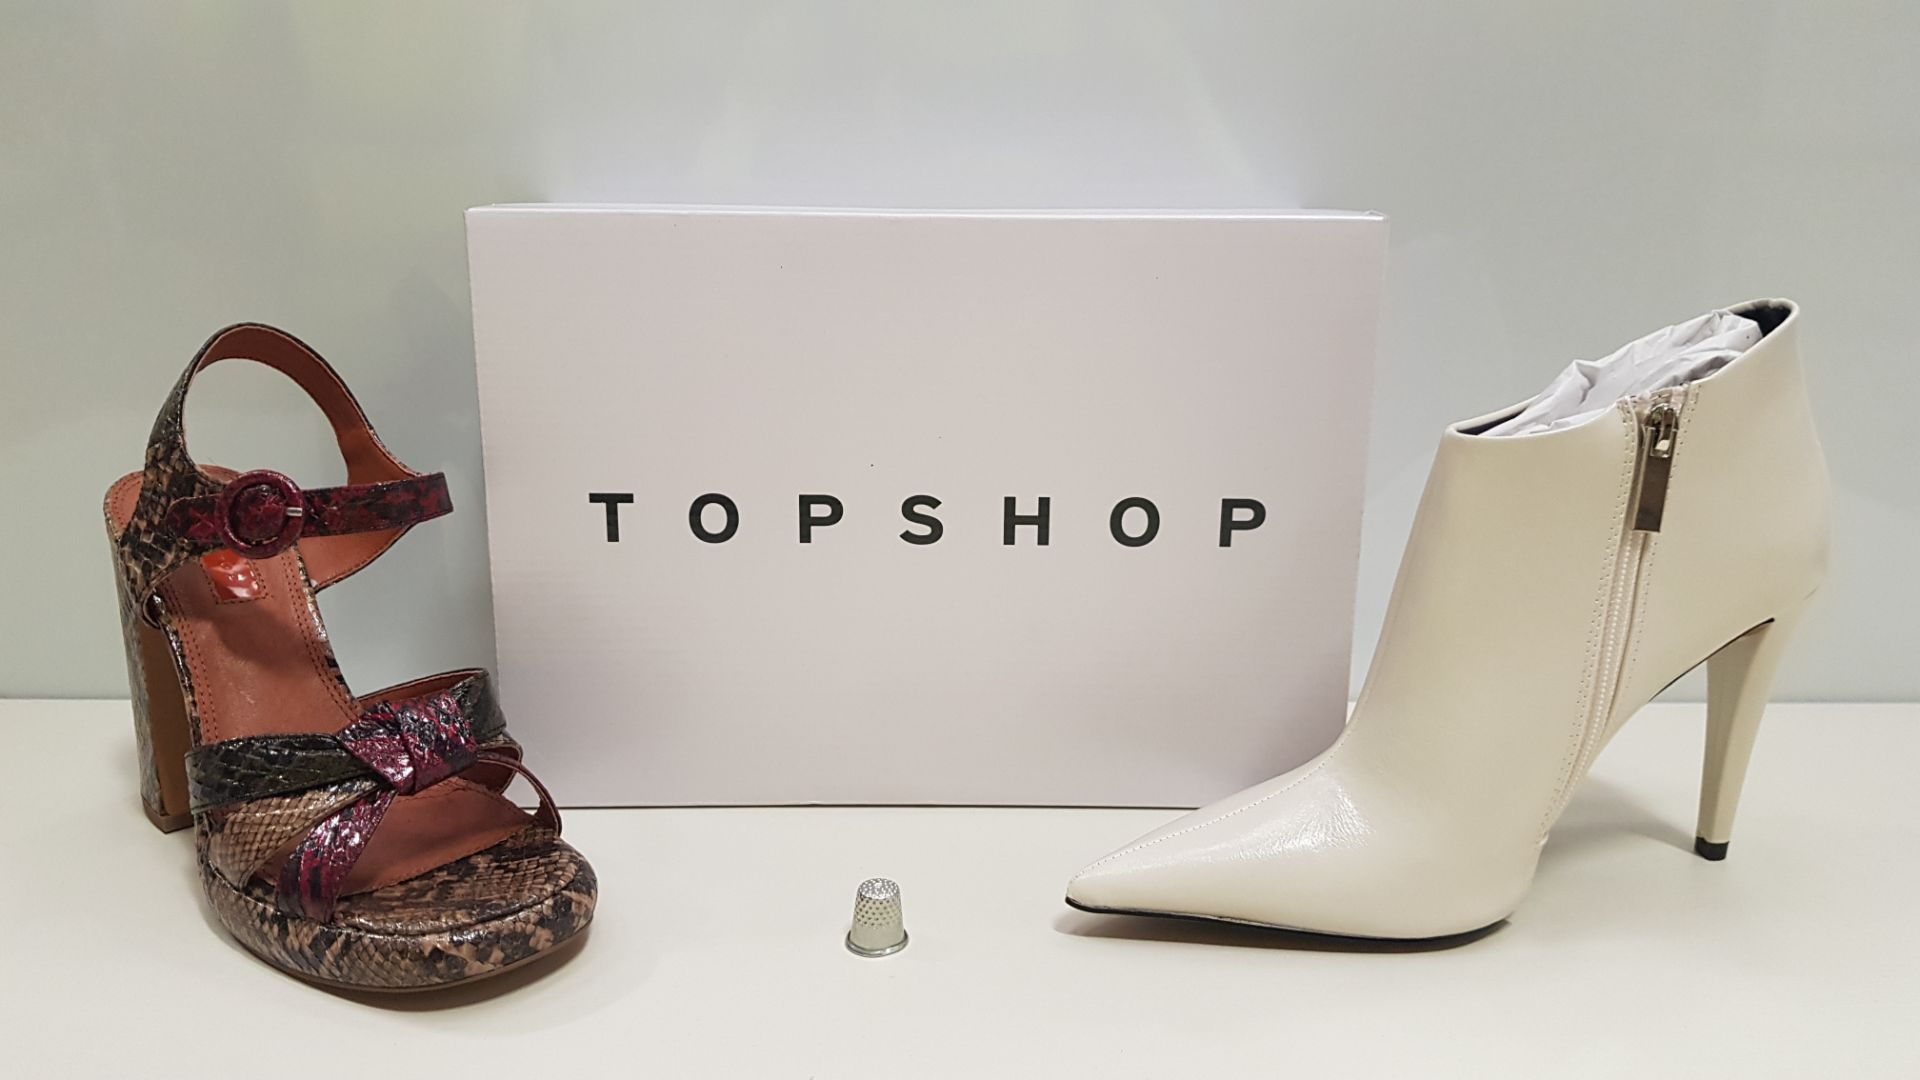 15 X BRAND NEW TOPSHOP SHOES - BRAND NEW HARLOW WHITE HEELED SHOES AND RIPPLE NATURAL BOOTS UK